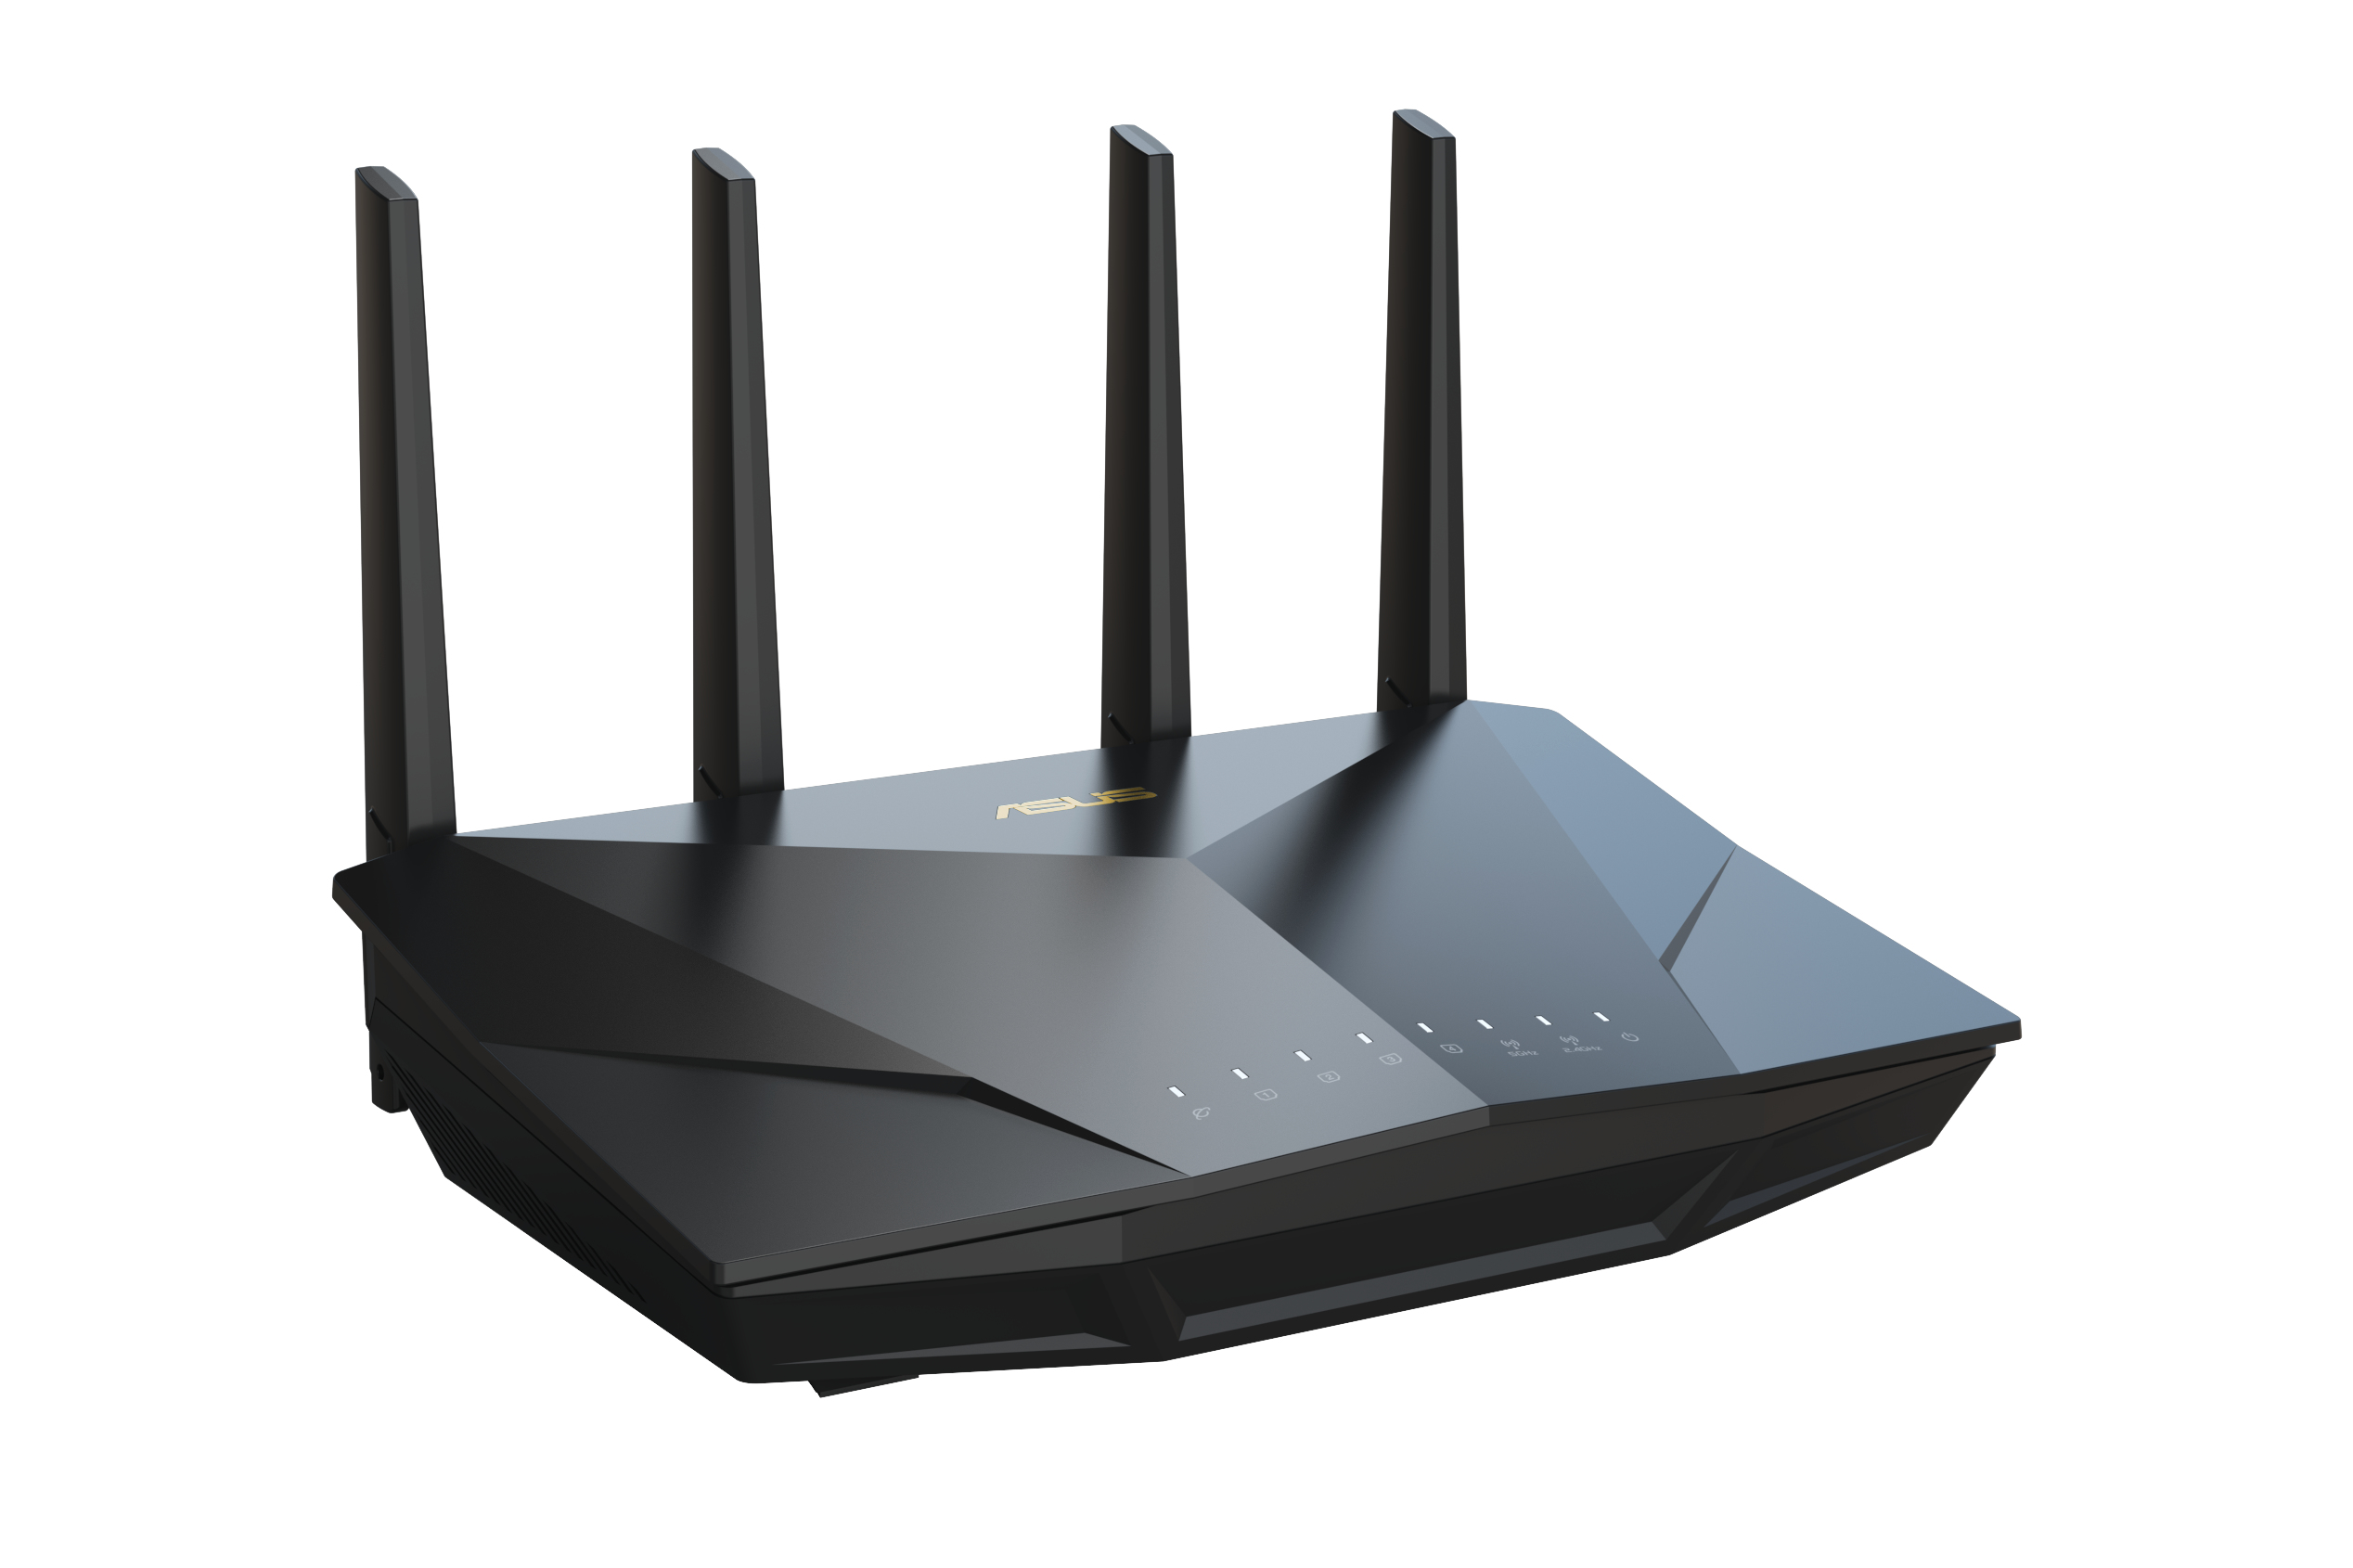 64 Device 4G LTE Router 5ghz With Dual Band Gigabit Ethernet LAN